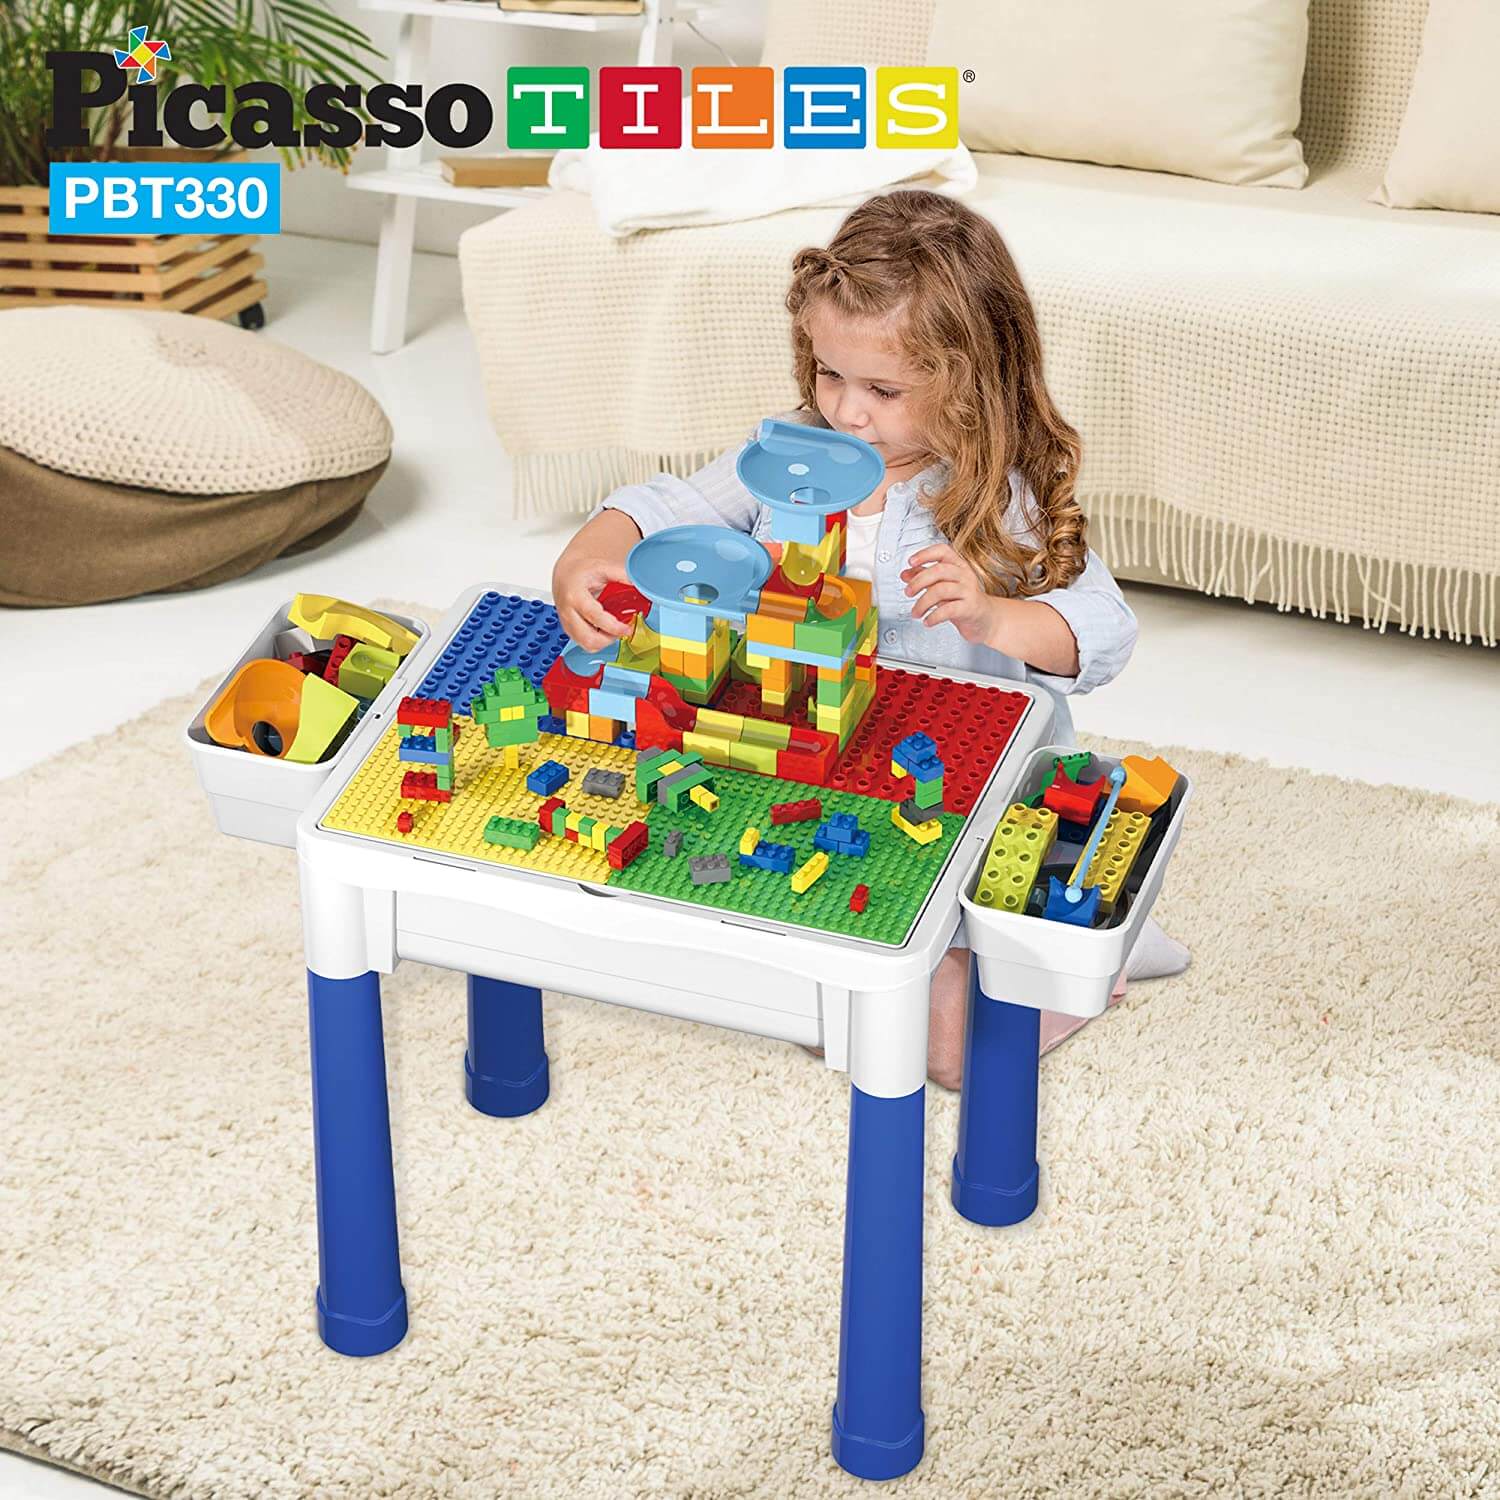 PicassoTiles Storage Activity Table with Blocks, Bricks and Marble Run 330 Piece Set